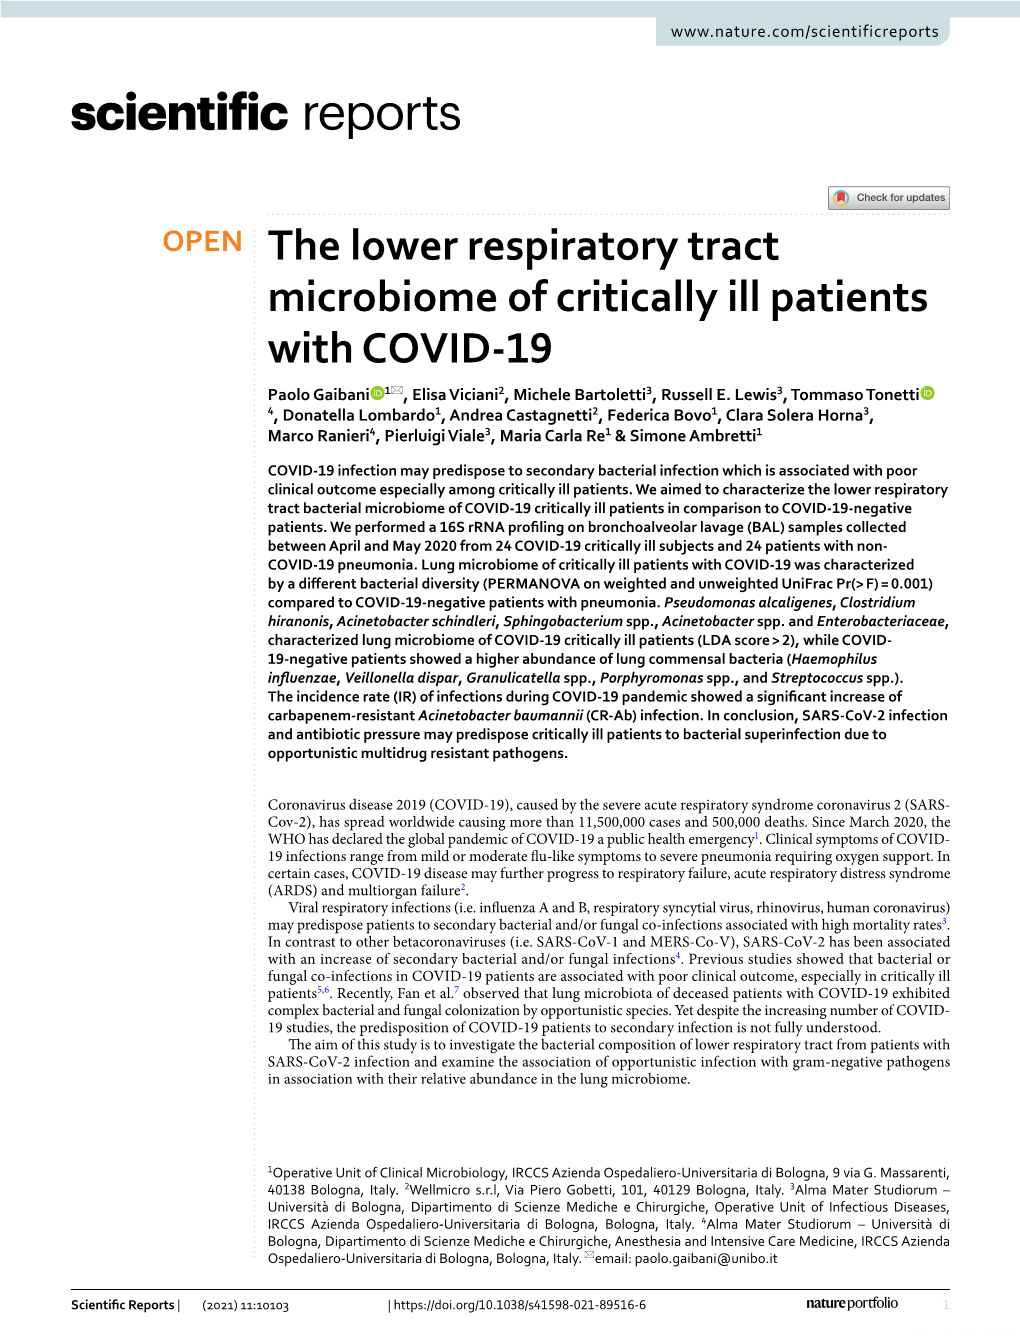 The Lower Respiratory Tract Microbiome of Critically Ill Patients with COVID-19